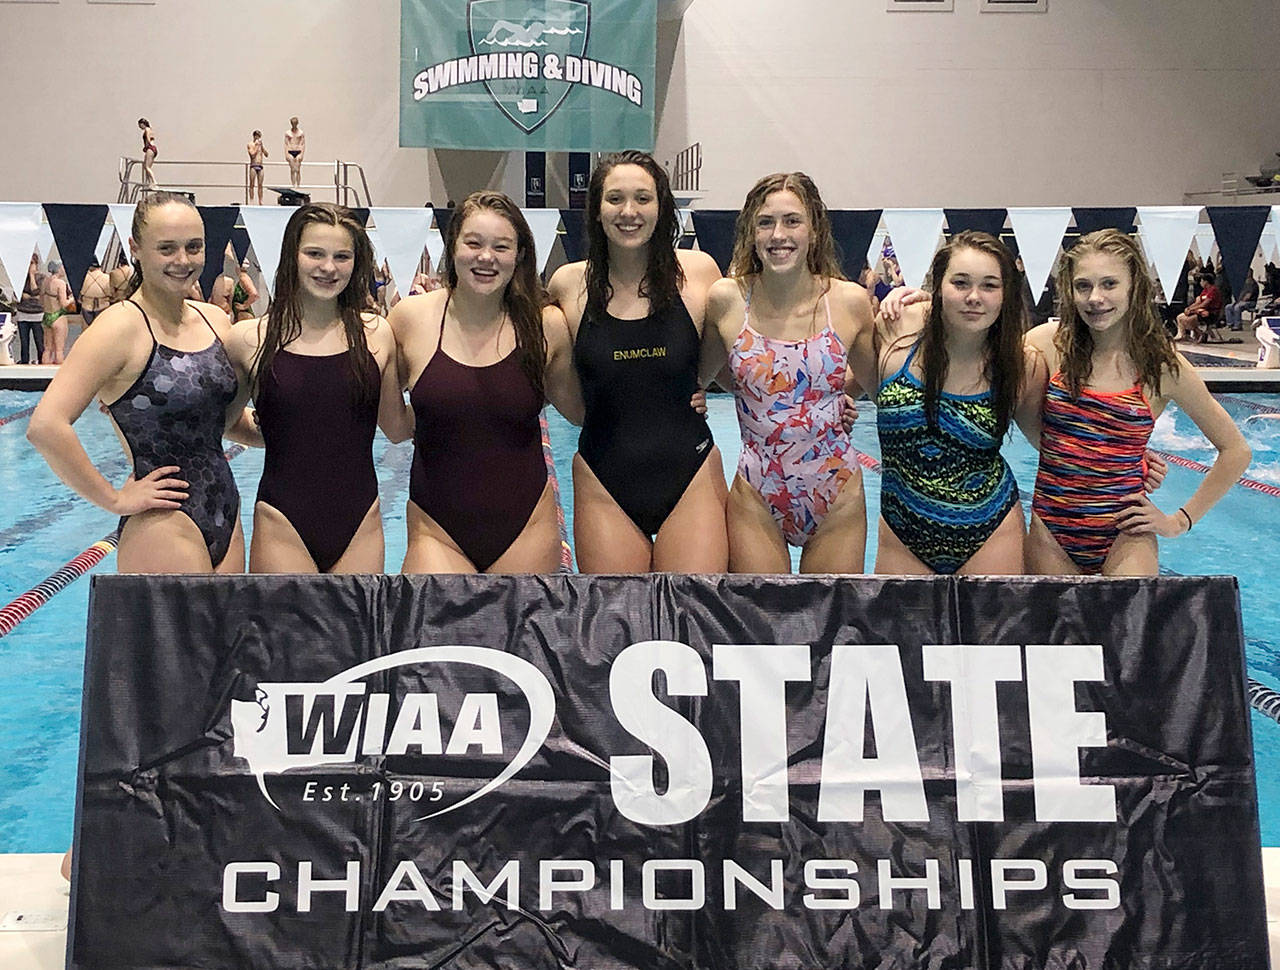 Competing for Enumclaw High at the state swim meet were, from left, Elsie Pratt, Anna Bogh, Jessica Lee, Ryley Pilato, and Margaret Petellin; also making the trip were alternates Cameron Lee and Ella Hoyne. Submitted photo